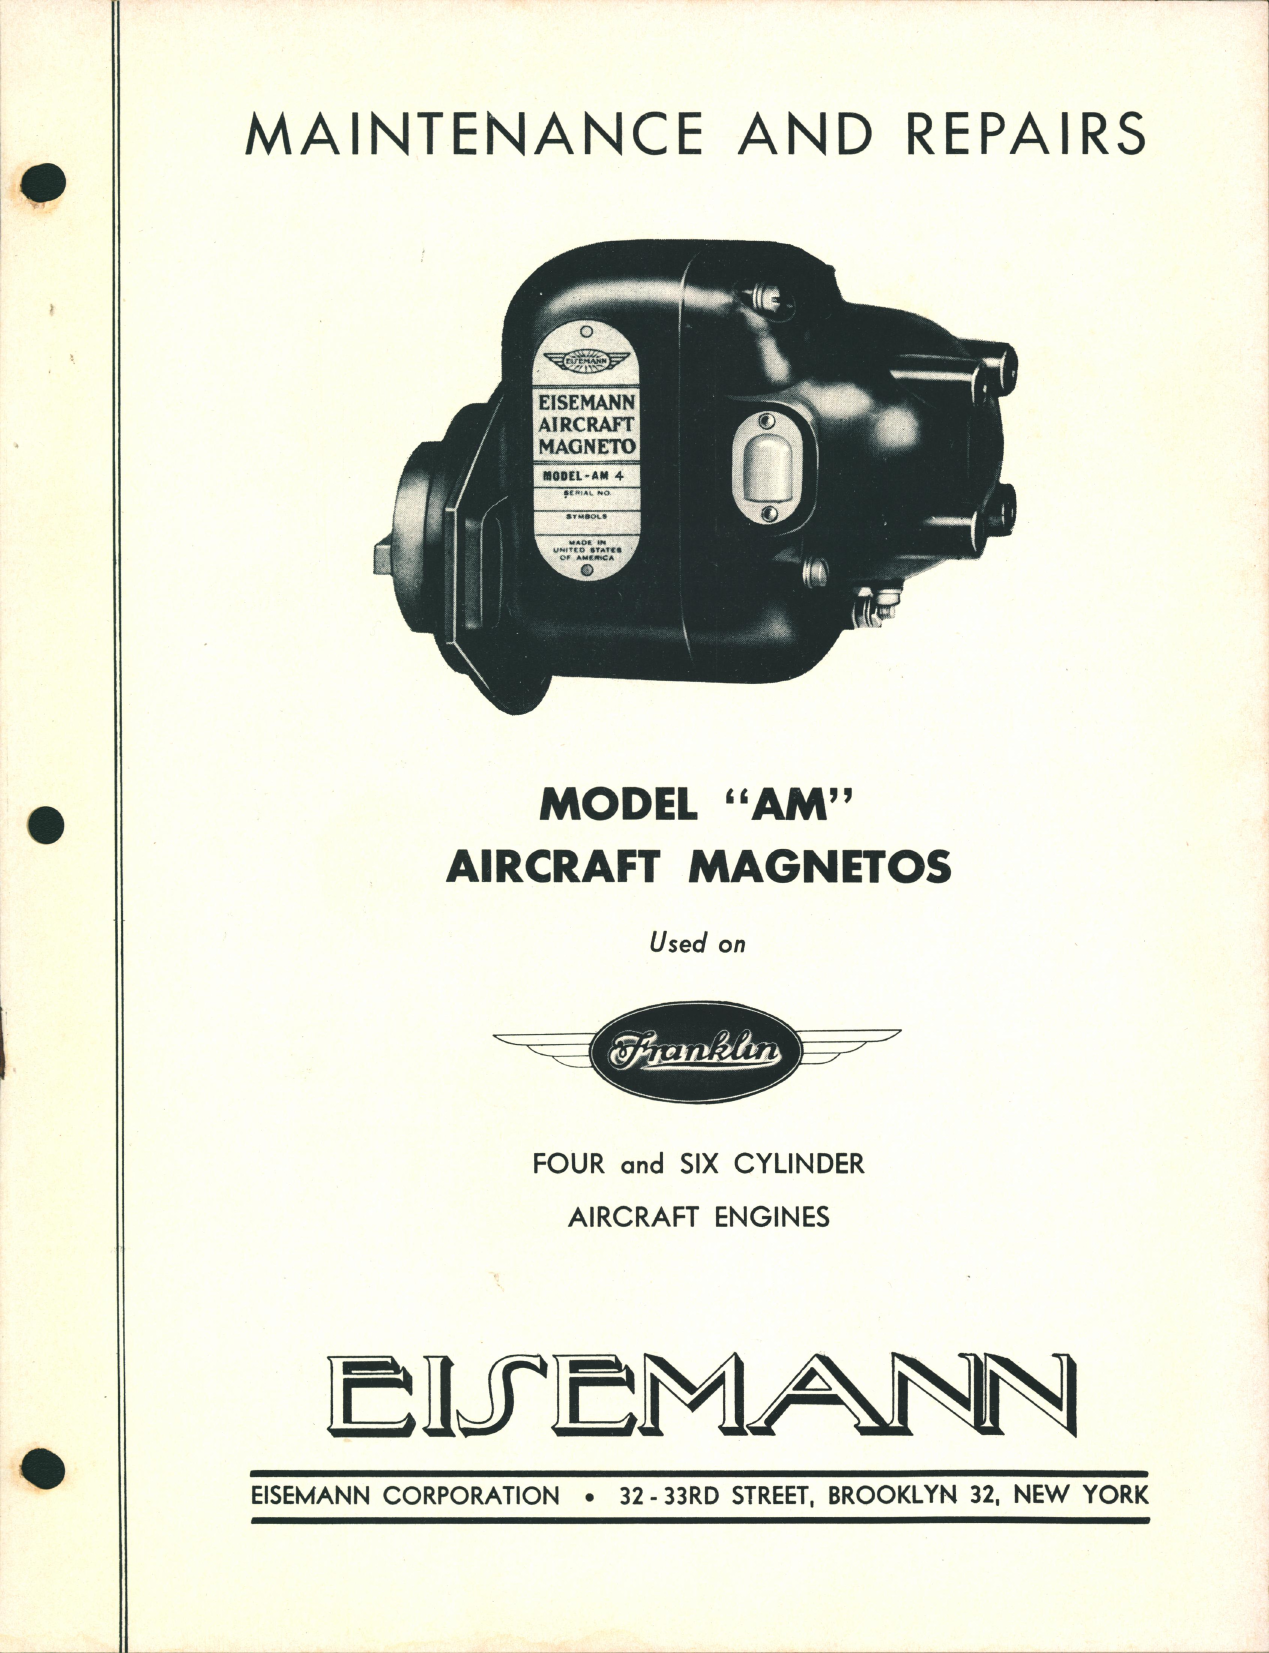 Sample page 1 from AirCorps Library document: Maintenance & Repairs of Model AM Magnetos